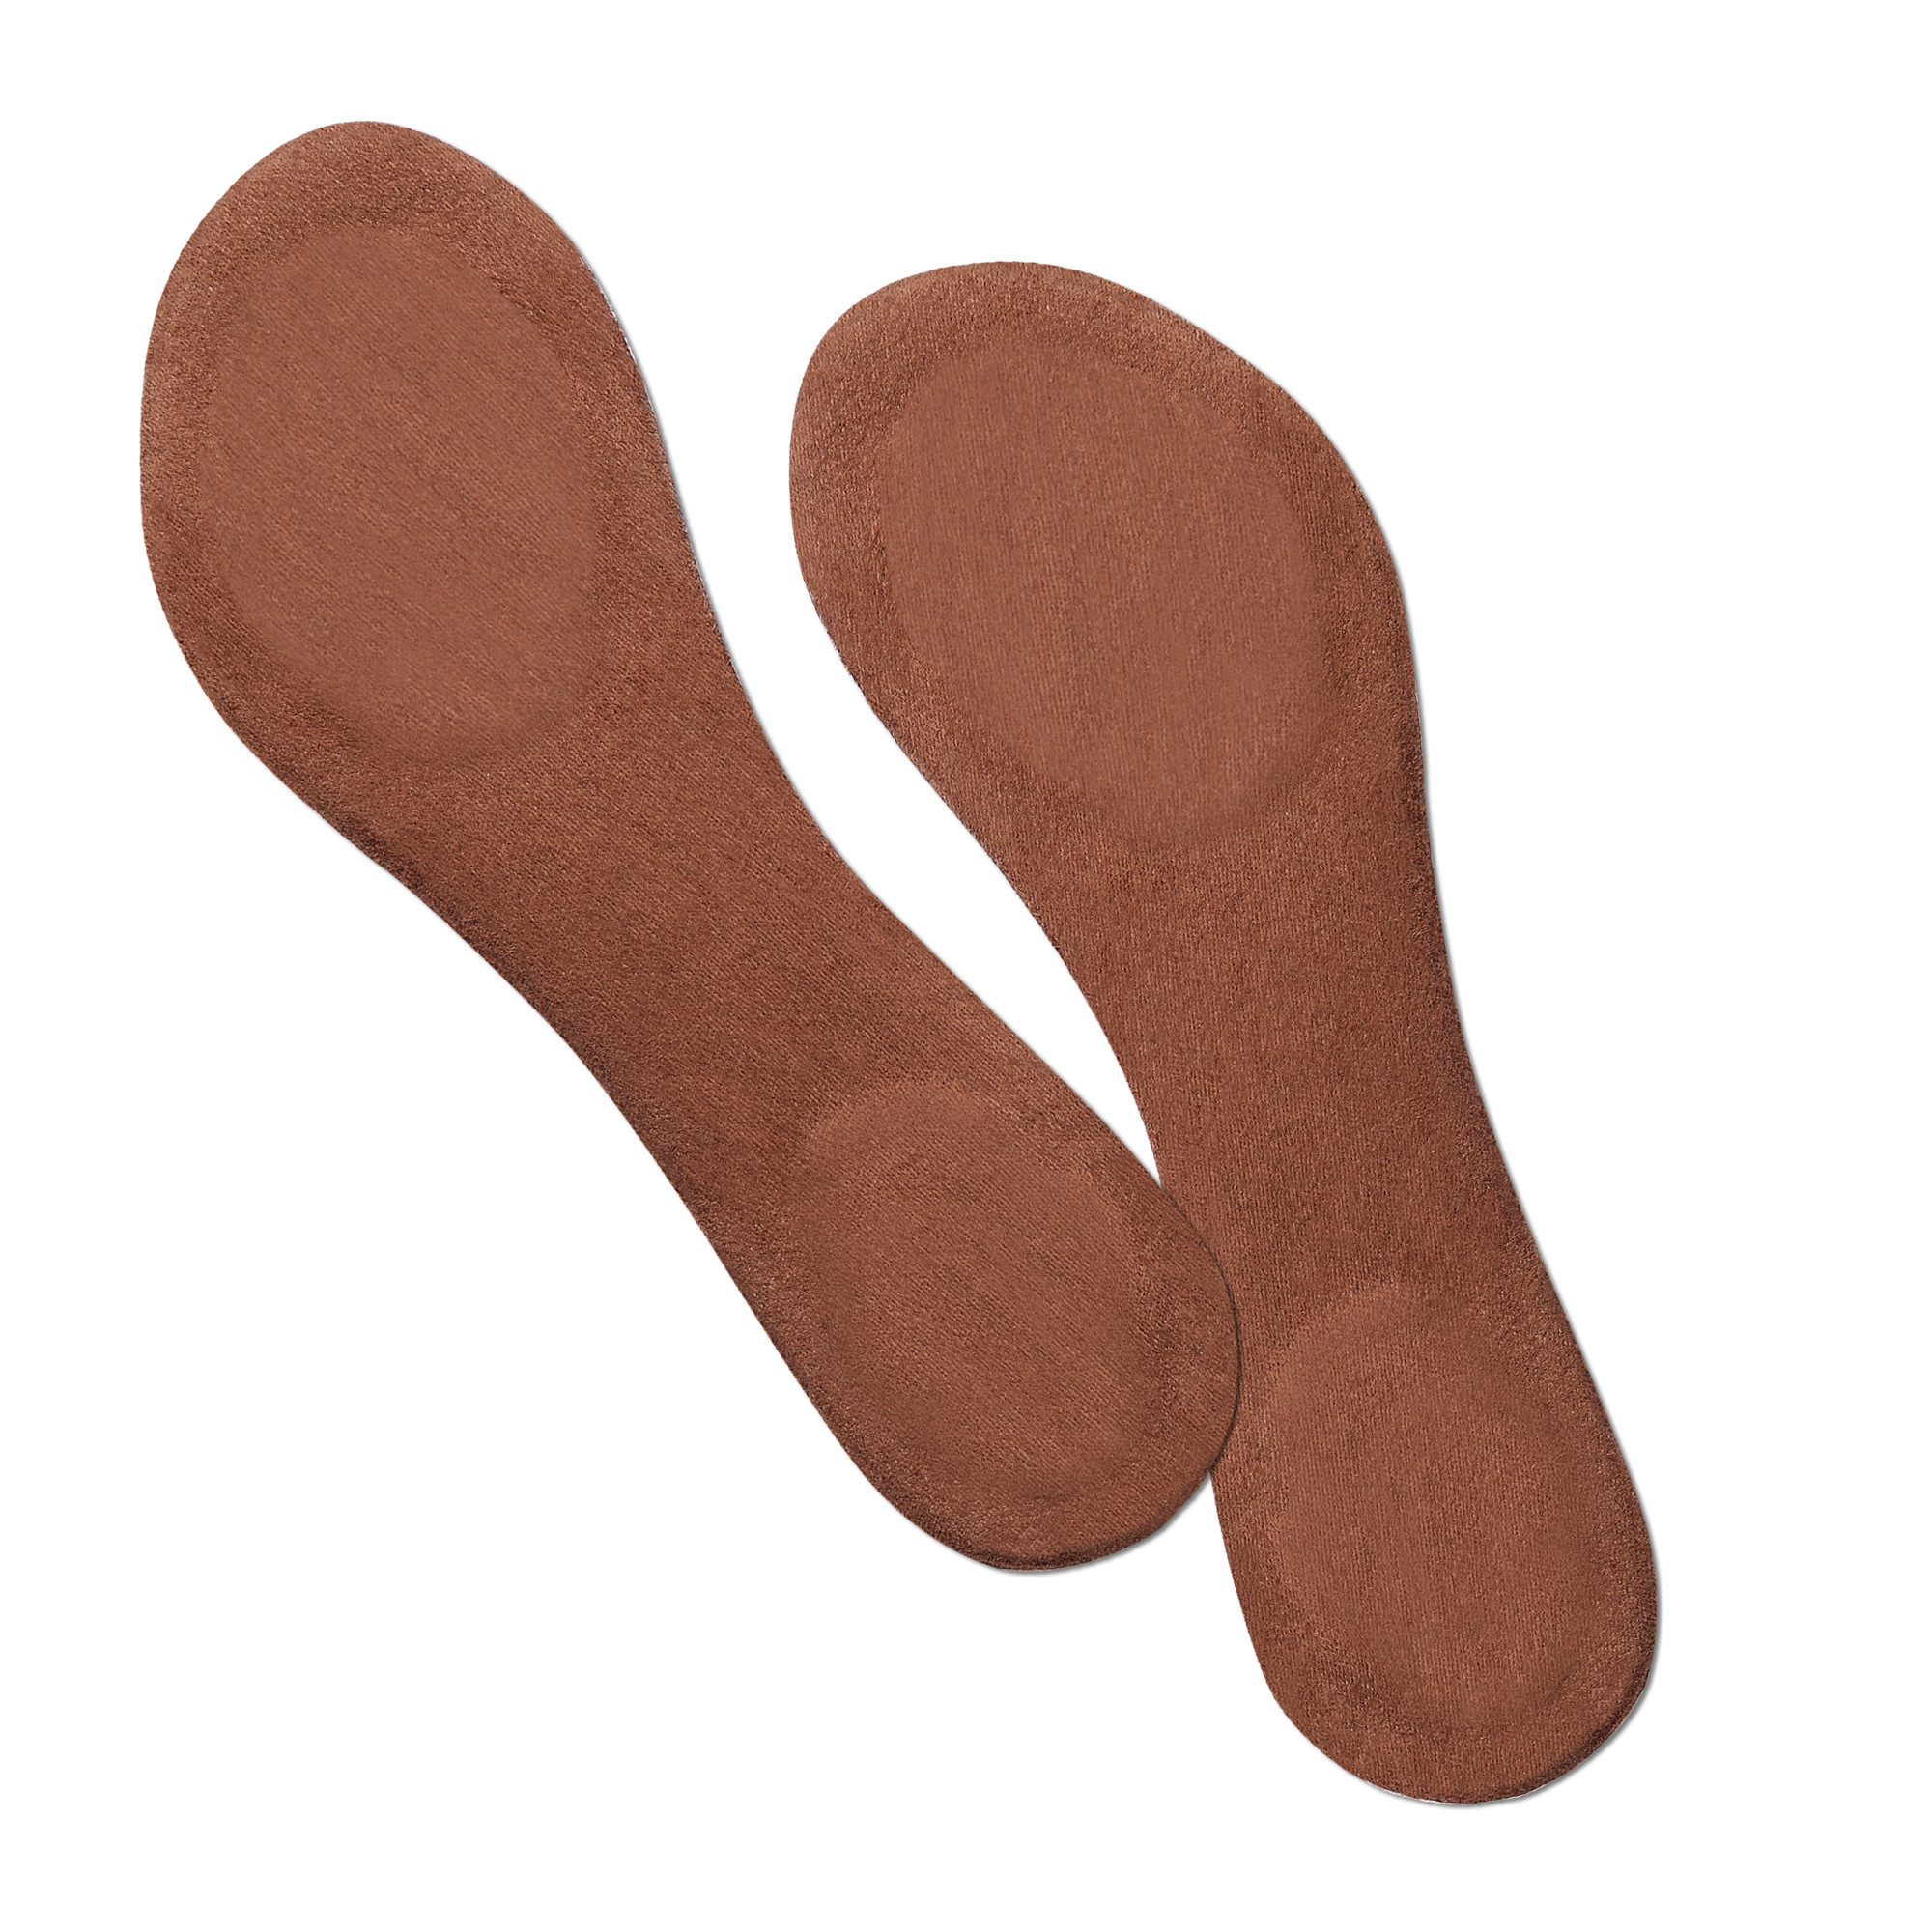 Tecniwork Insoles ¾ foam patterned Brown Night and Day 6-pair display